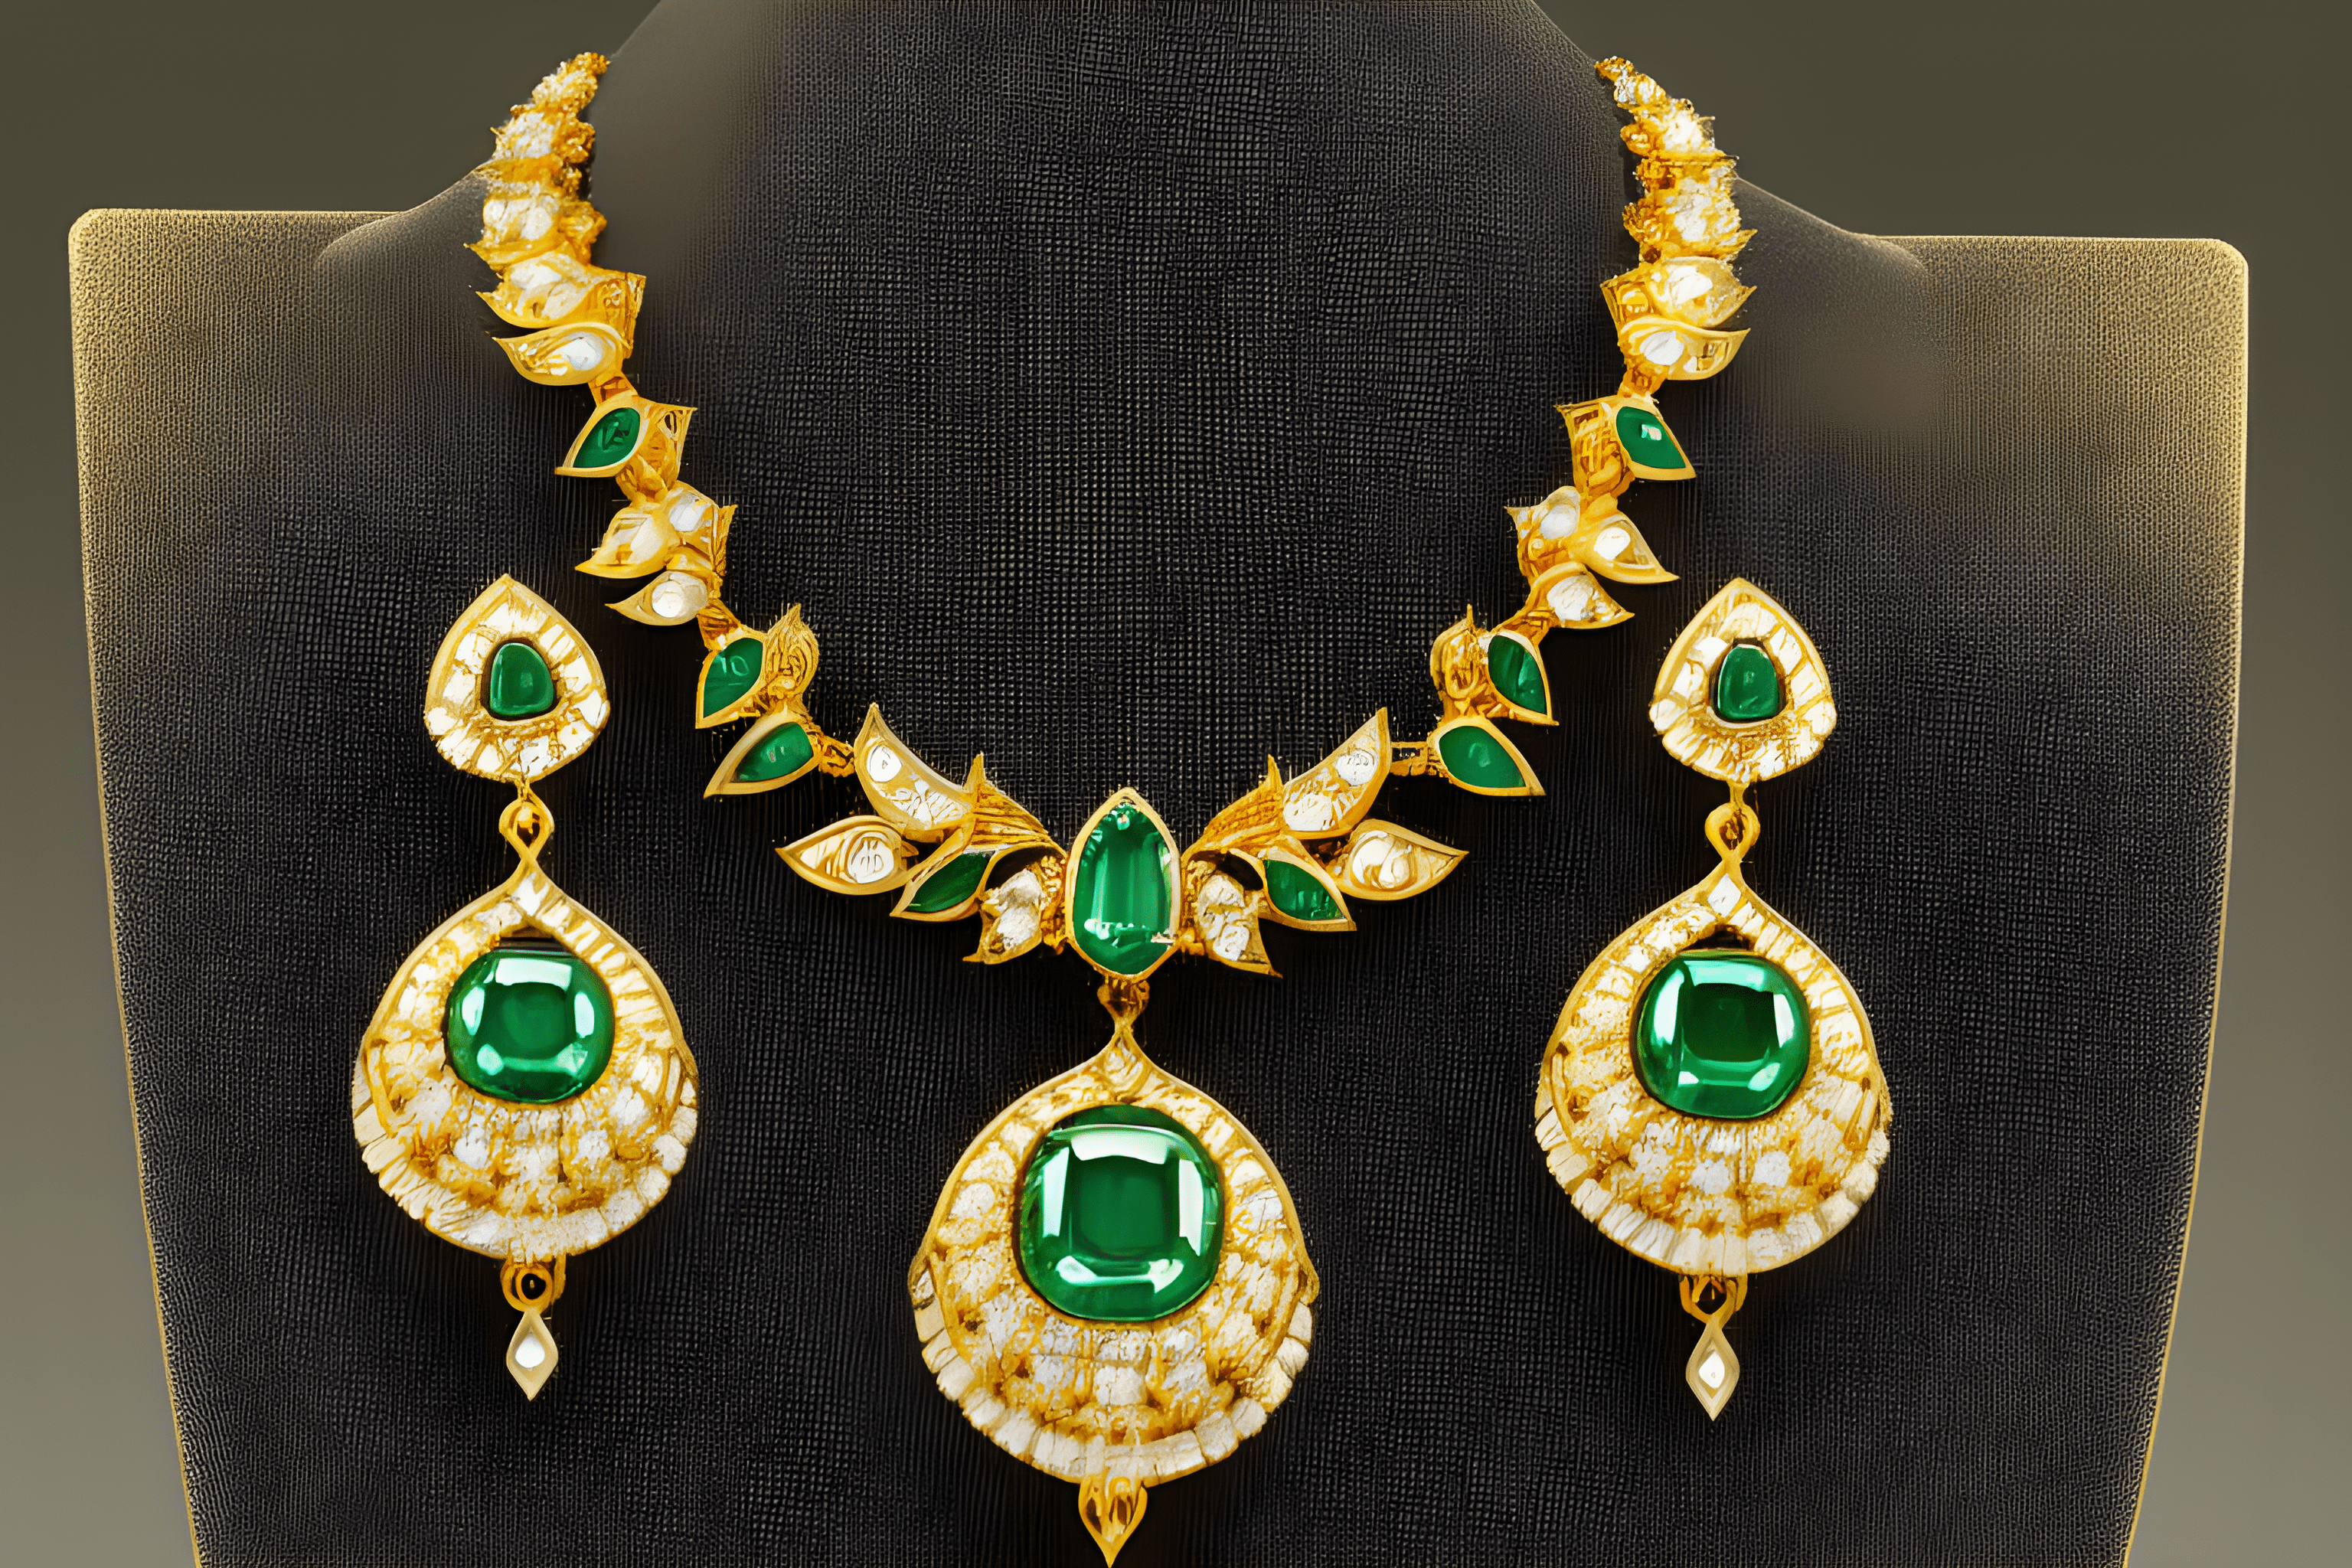 Image of a full necklace and earring set